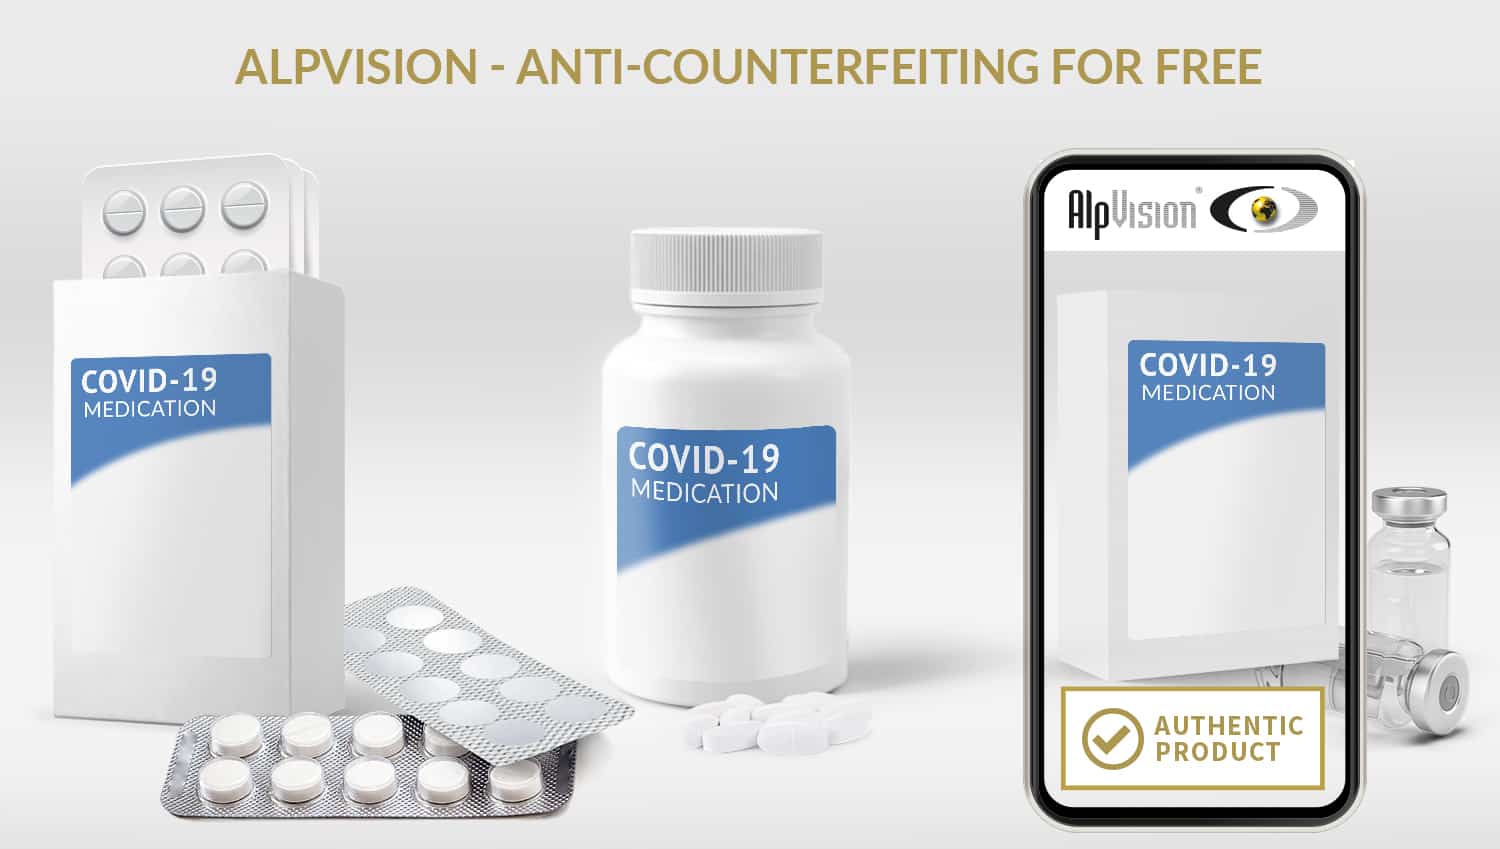 Free anti-counterfeiting solution for COVID-19 medicines